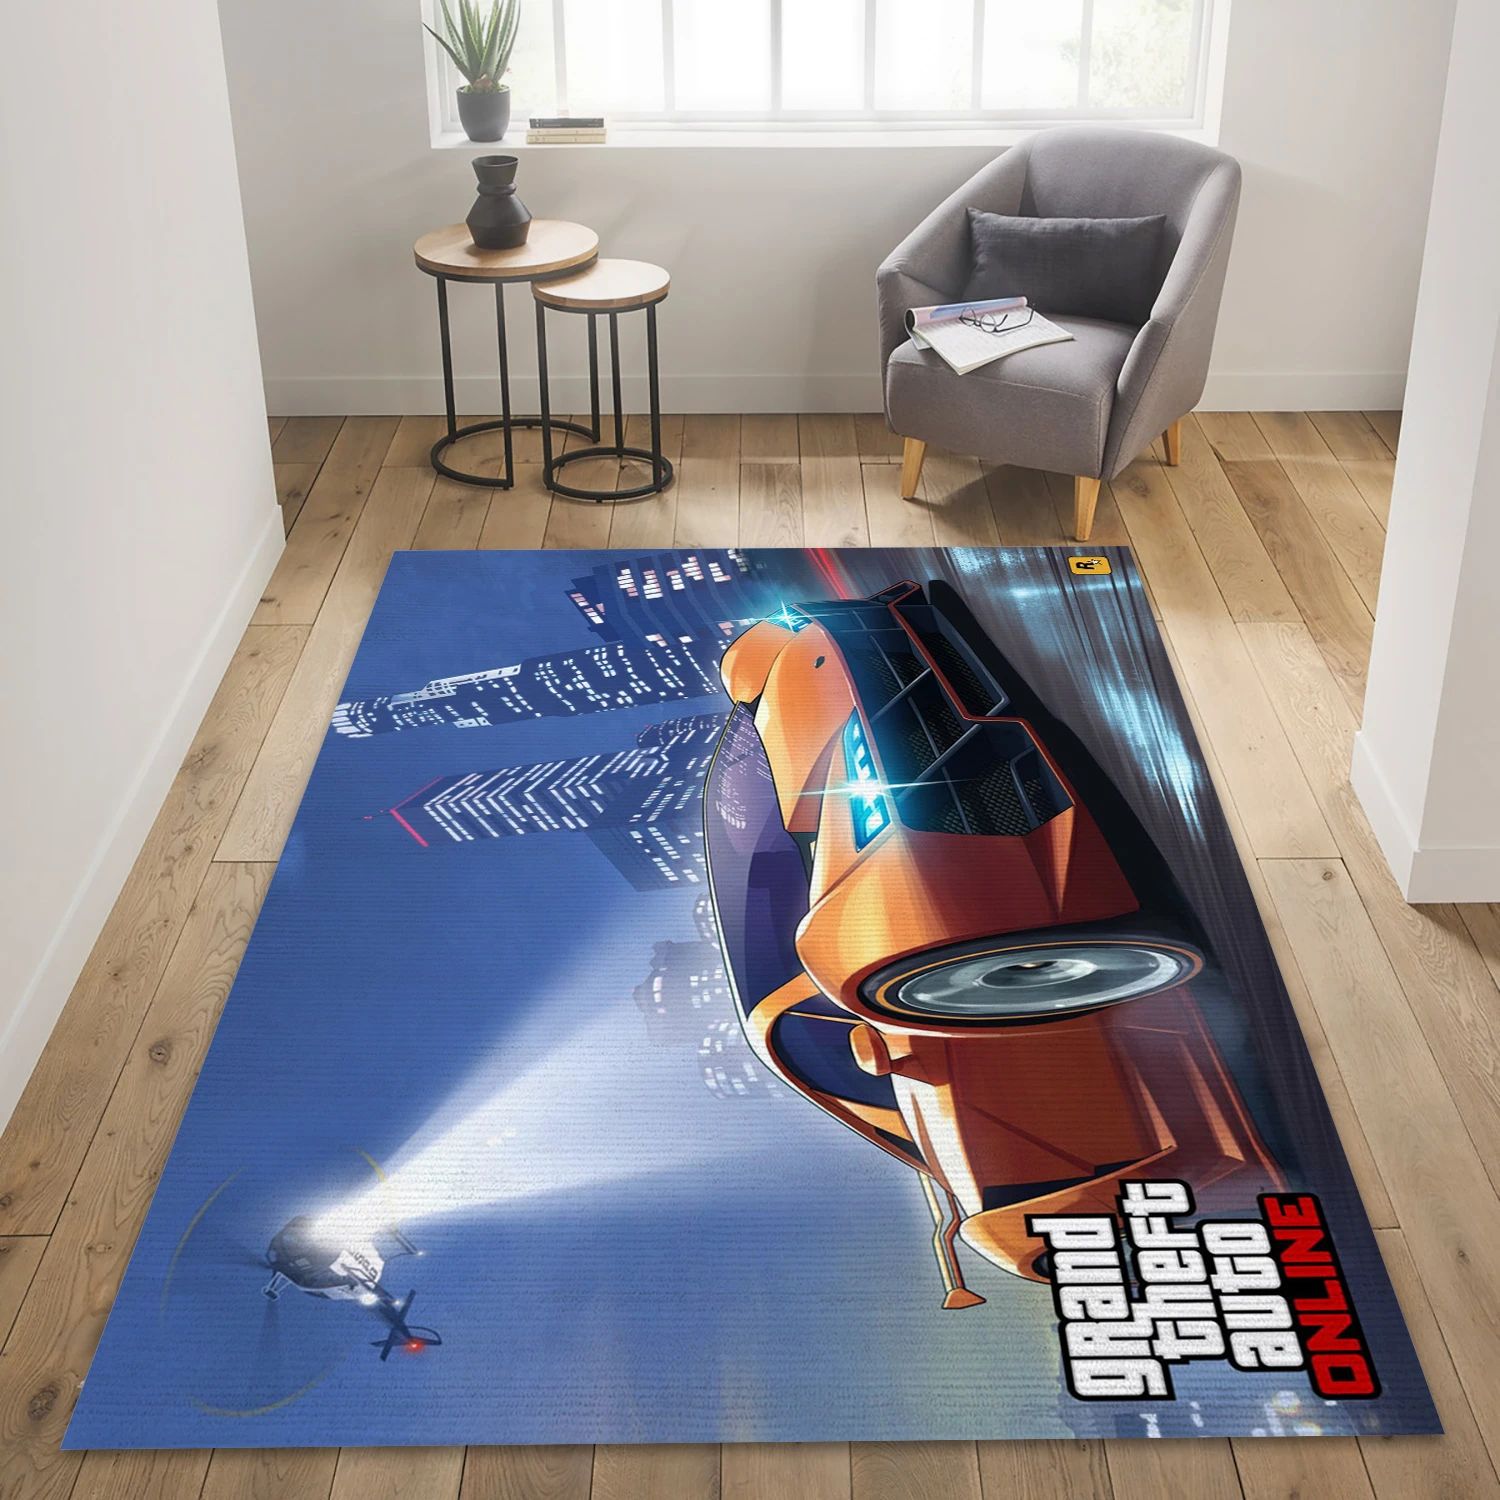 Grand Theft Auto V Video Game Reangle Rug, Area Rug - US Decor - Indoor Outdoor Rugs